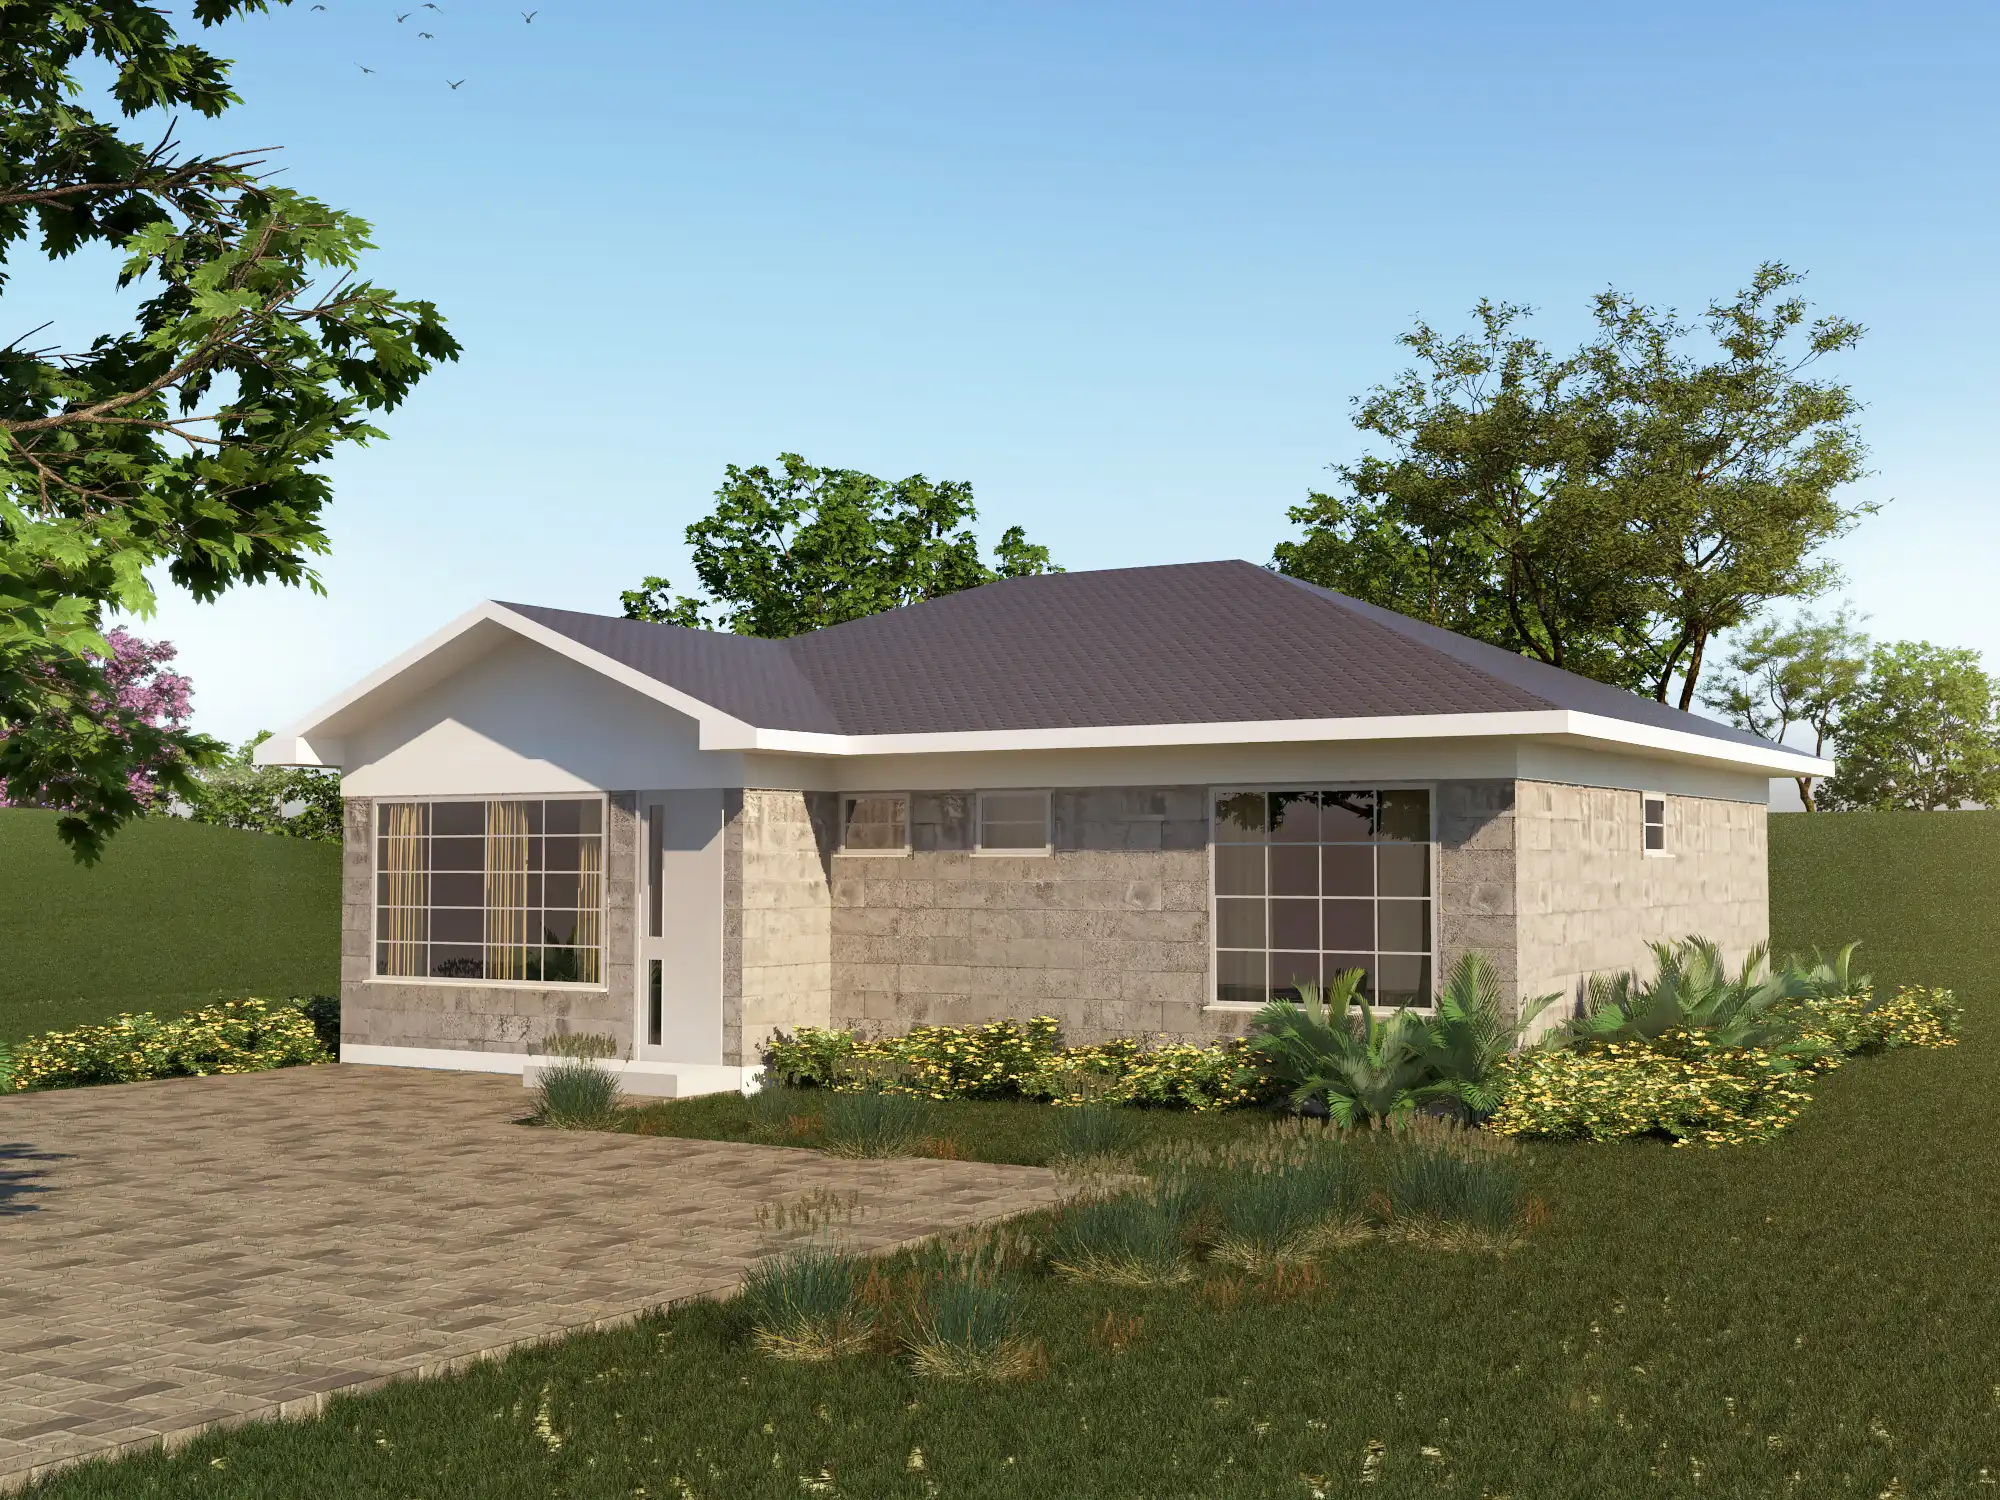 3 Bedroom Bungalow -ID 3131 - 3 BED BNGL TP3 OP1_RENDER_edited.jpg from Inuua Tujenge house plans with 3 bedrooms and 2 bathrooms. ( bungalow )